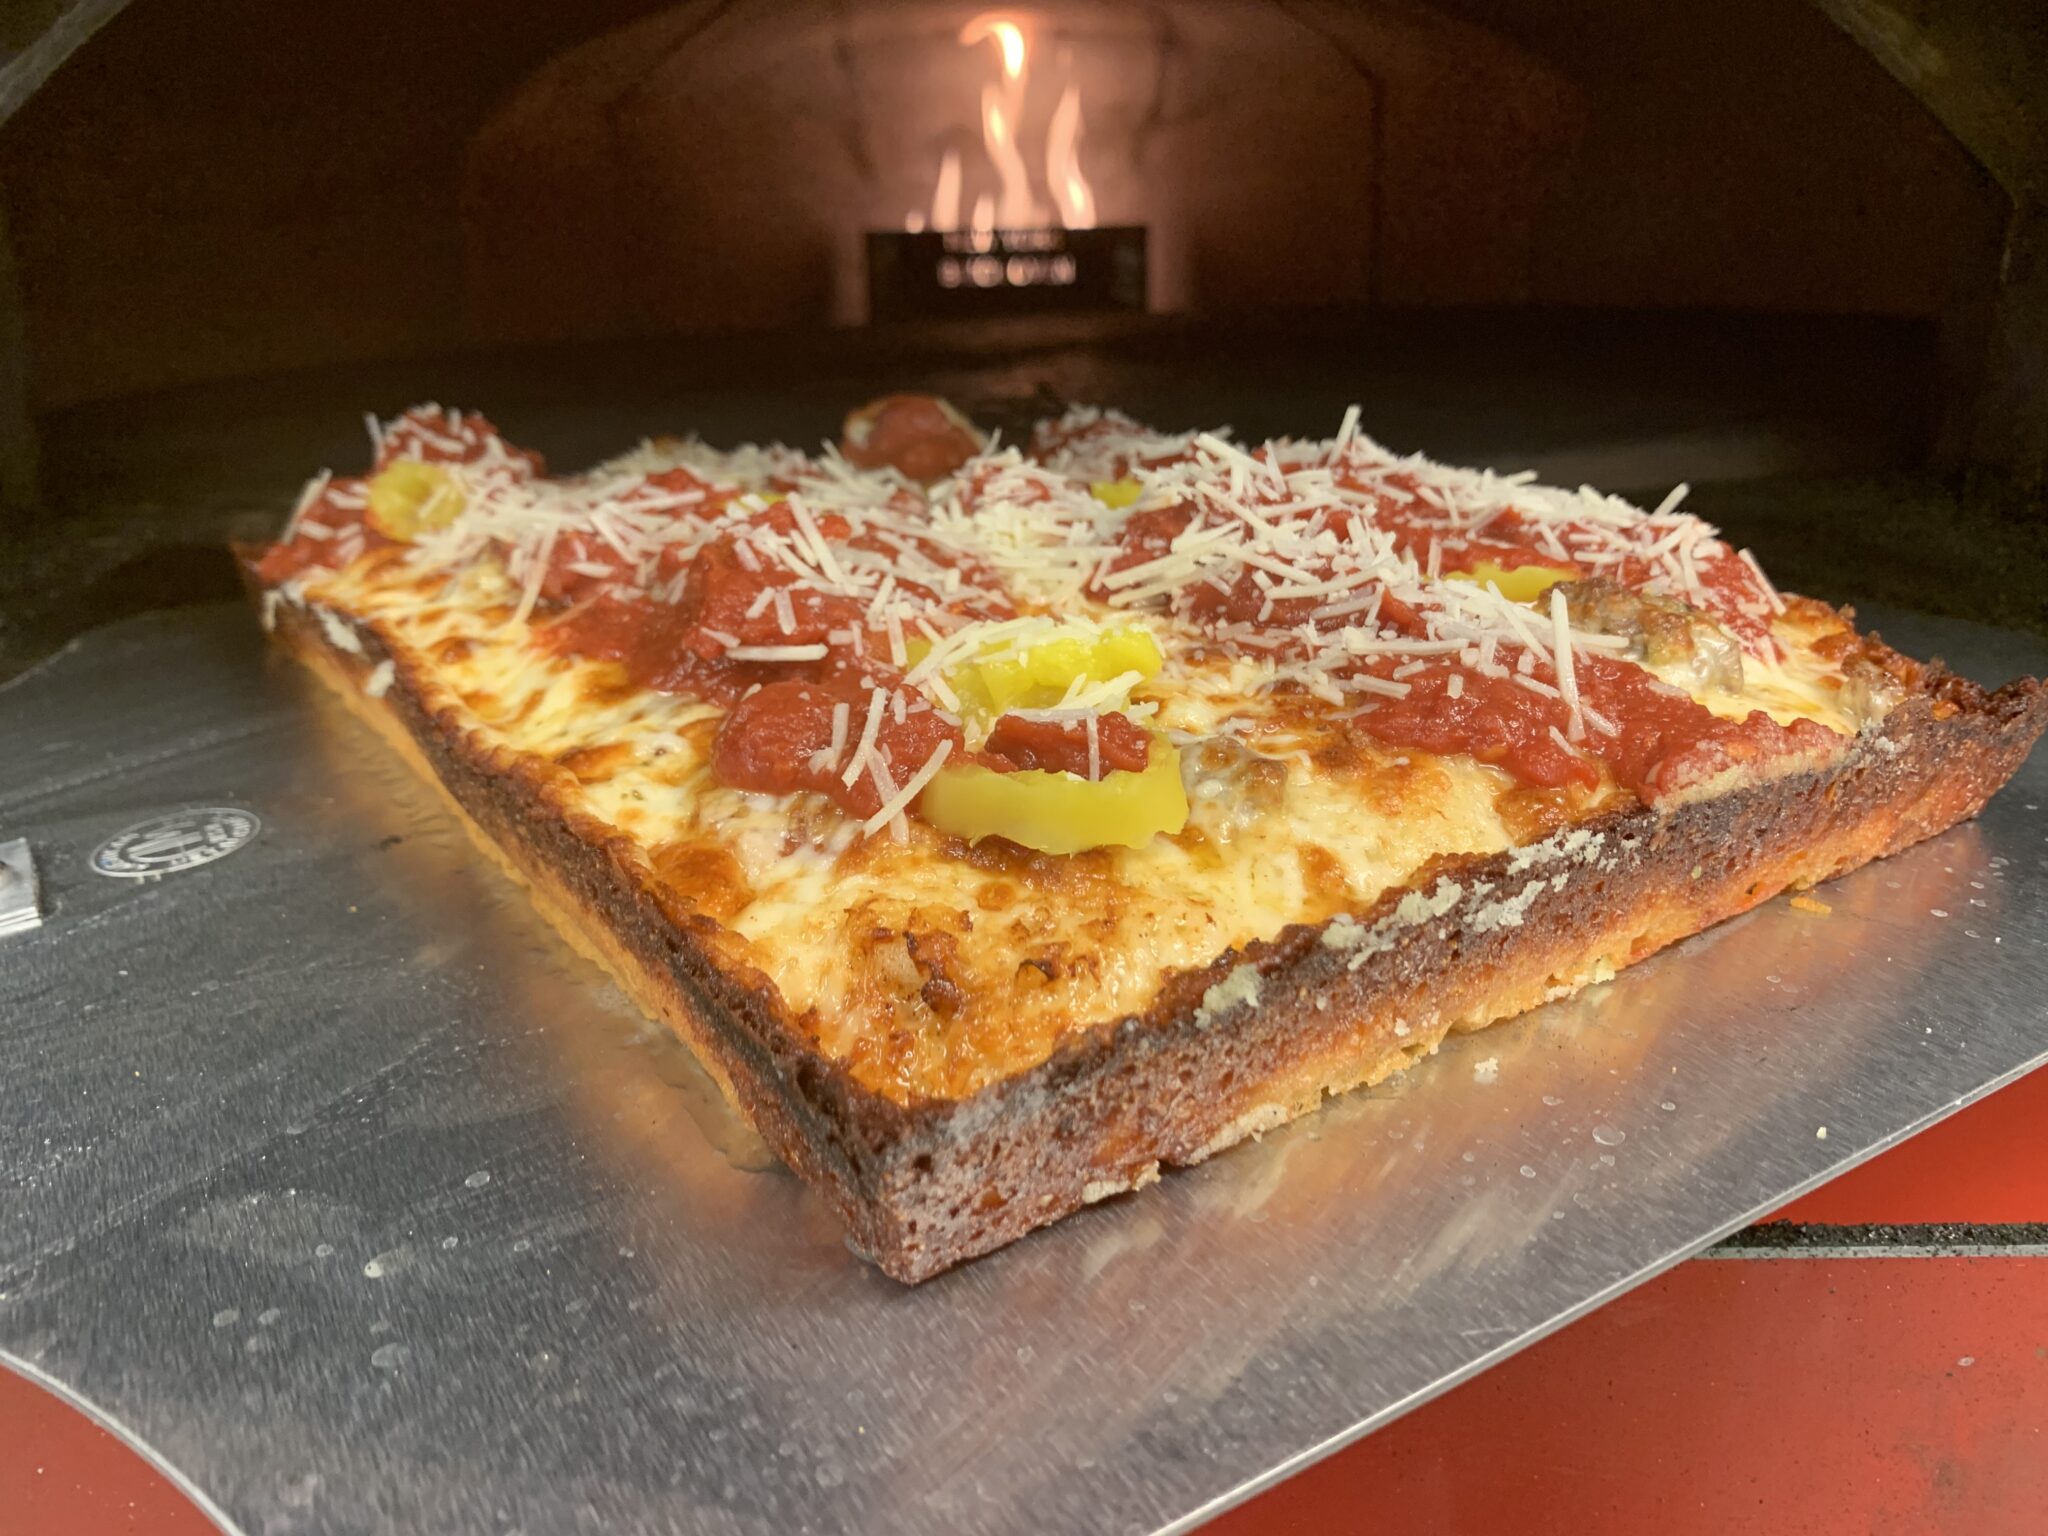 A Detroit-style pizza with pepperoni, sausage, banana peppers, and cheese staged in front of a pizza oven.